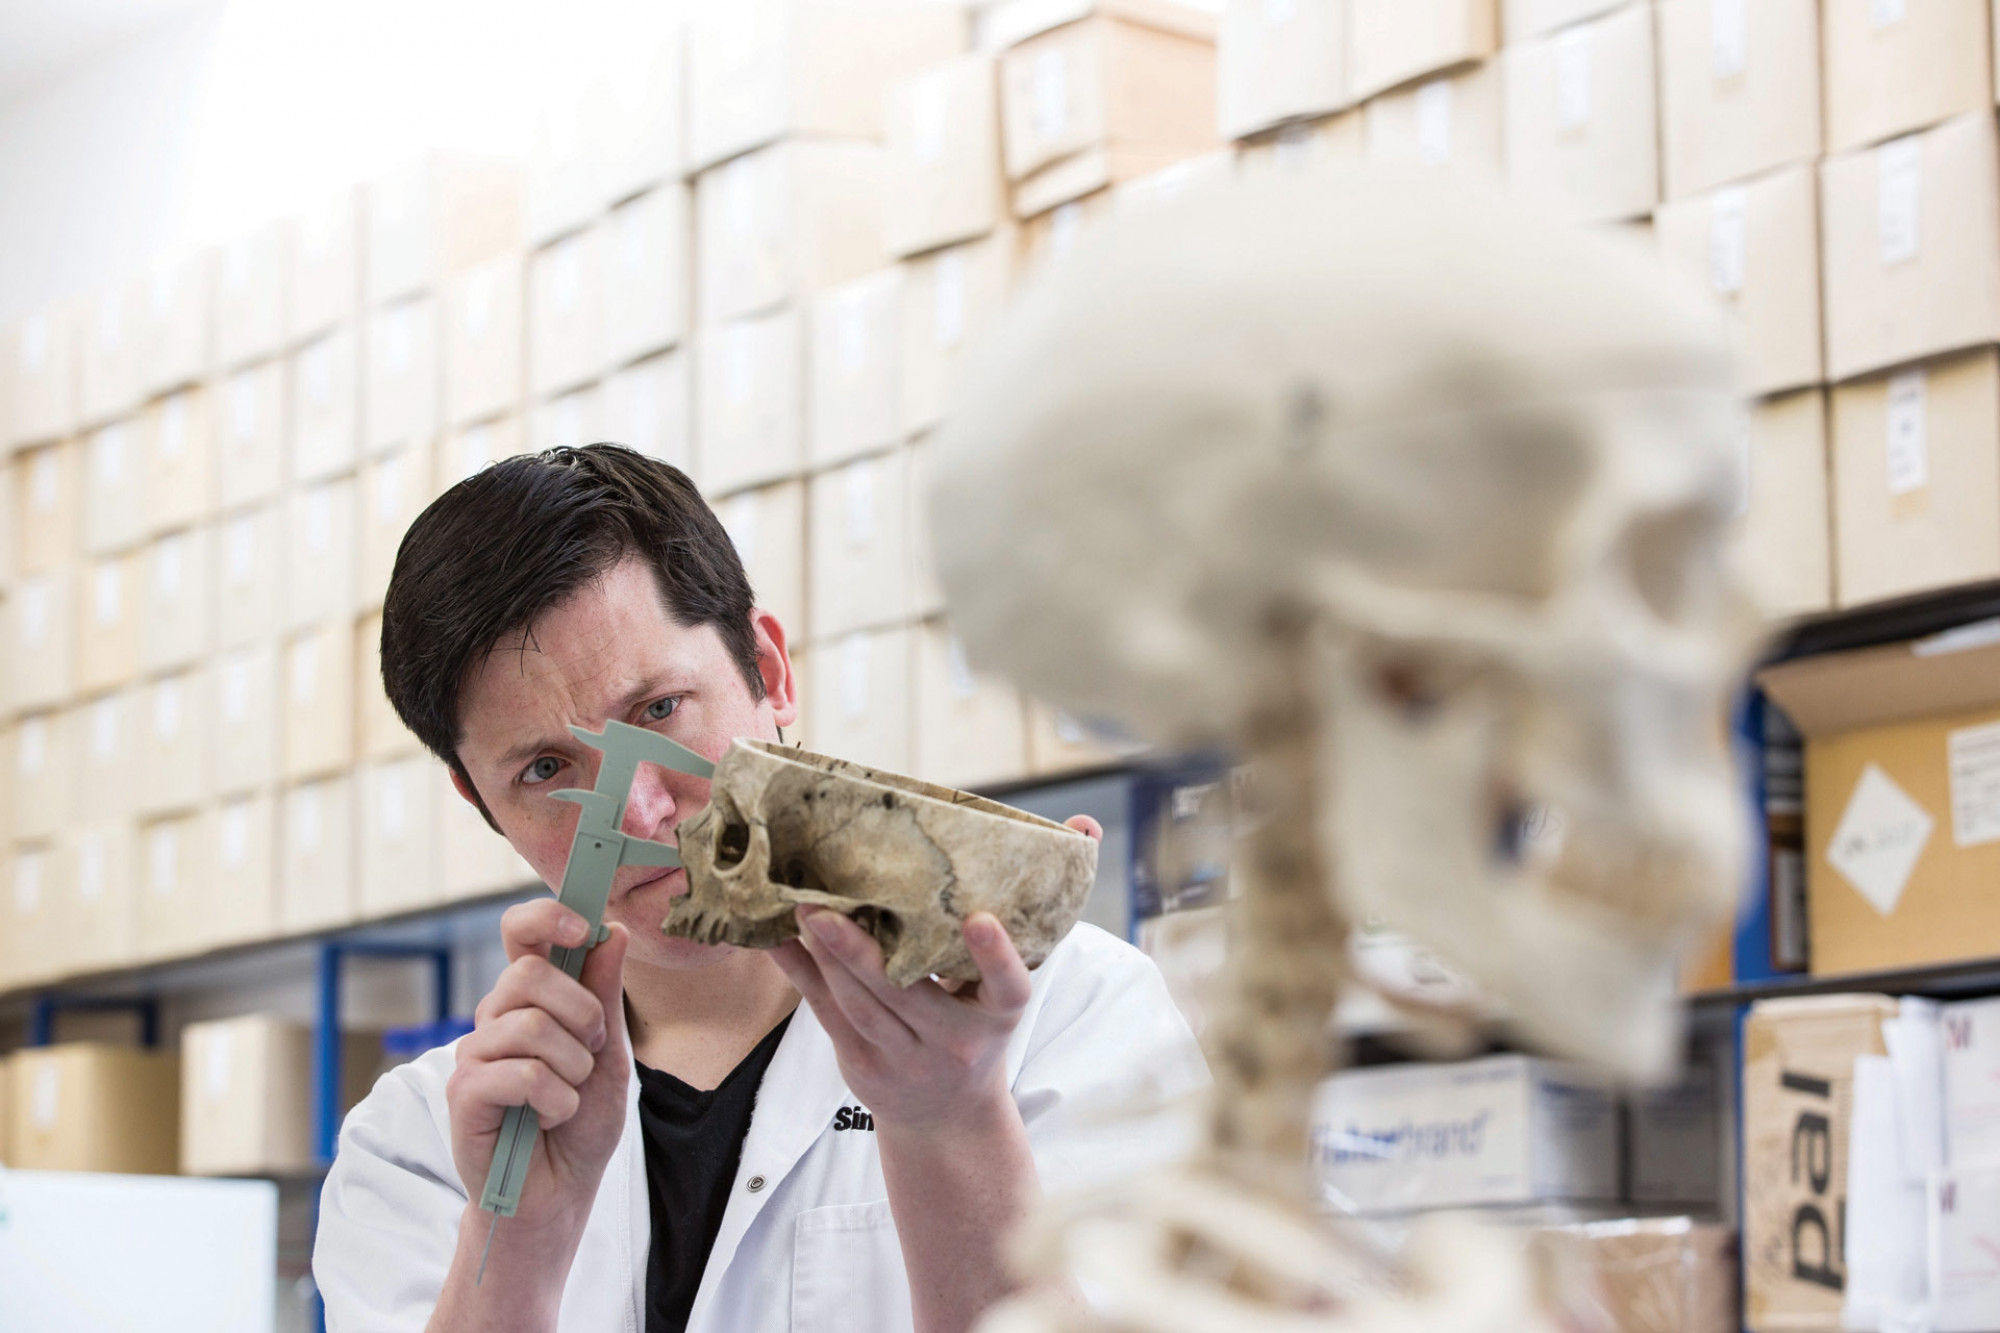 Postgraduate student measuring a skull with an interesting piece of equipment